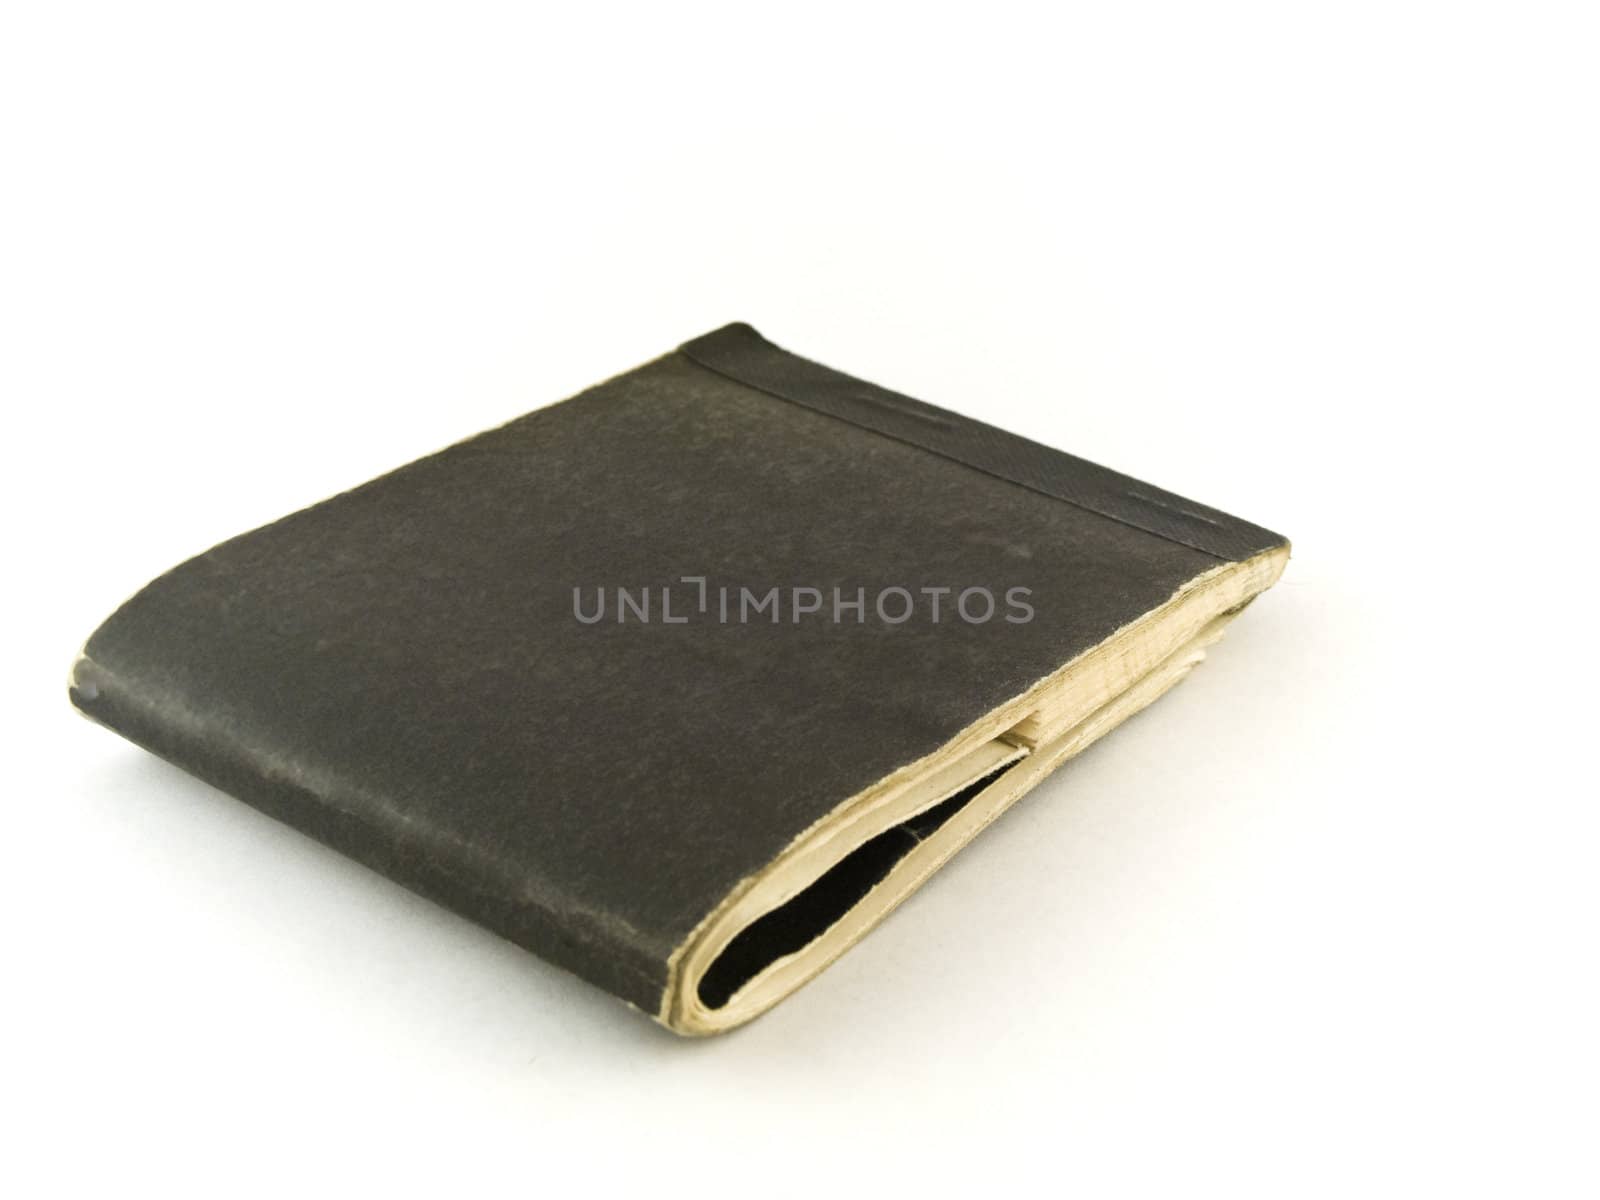 Old Chequebook on White Background by bobbigmac